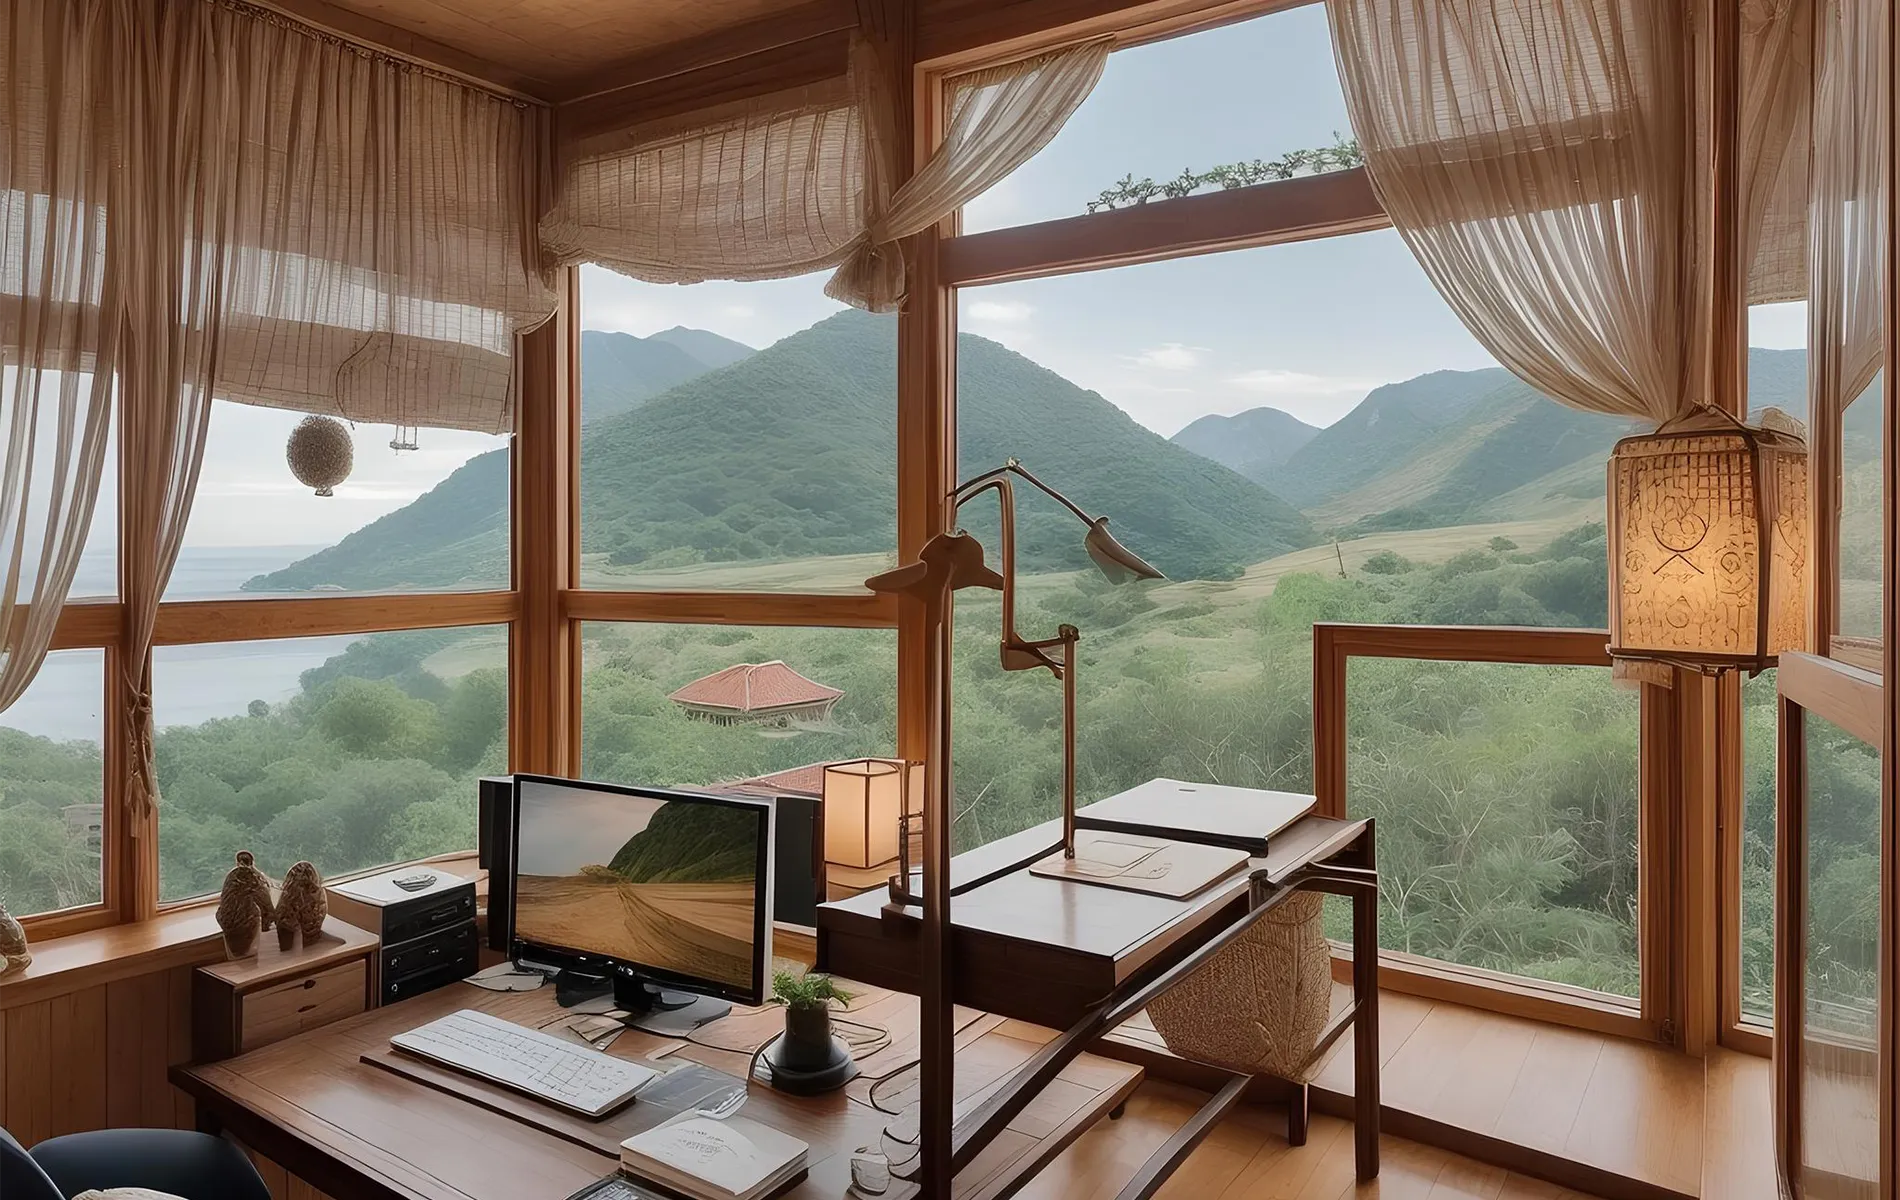 tranquli and serene scane of a desk setup ,netural tonse and theme ,stunning view